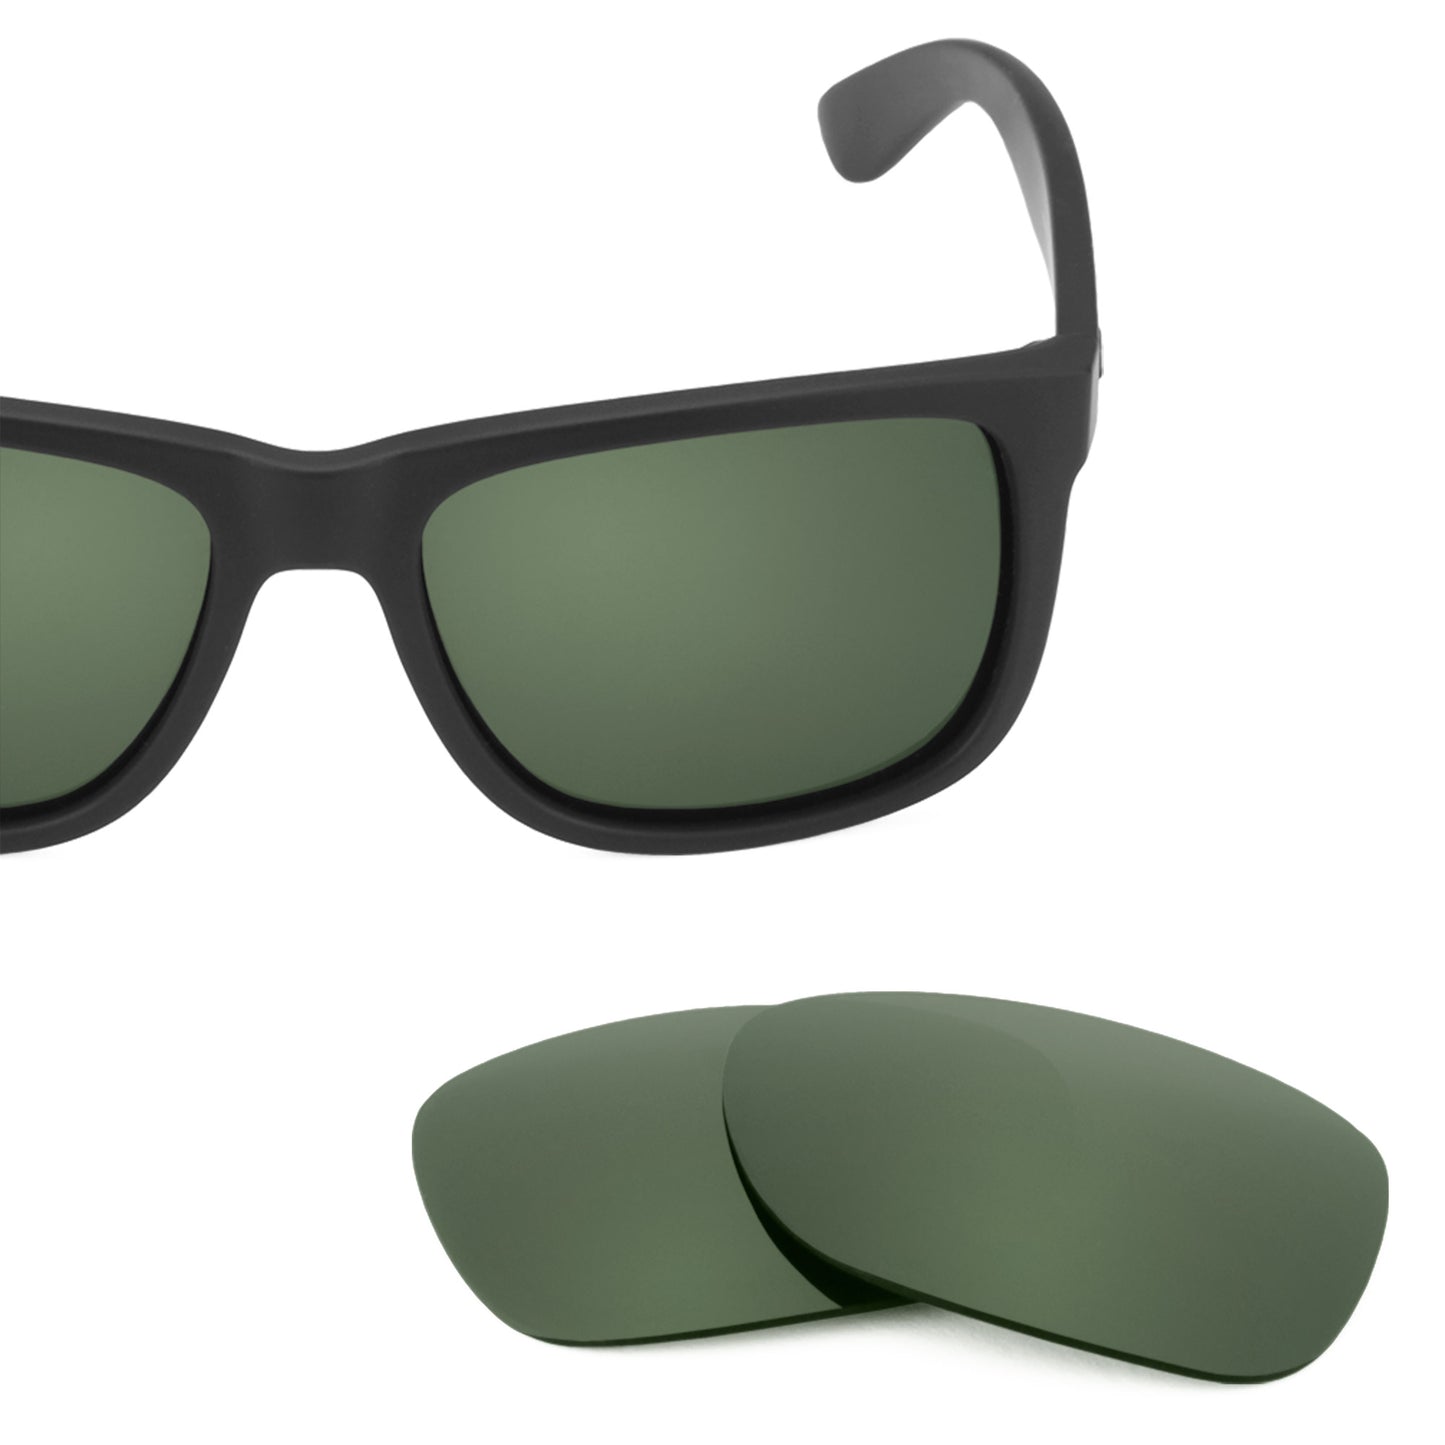 Revant replacement lenses for Ray-Ban Justin RB4165 54mm Elite Polarized Gray Green